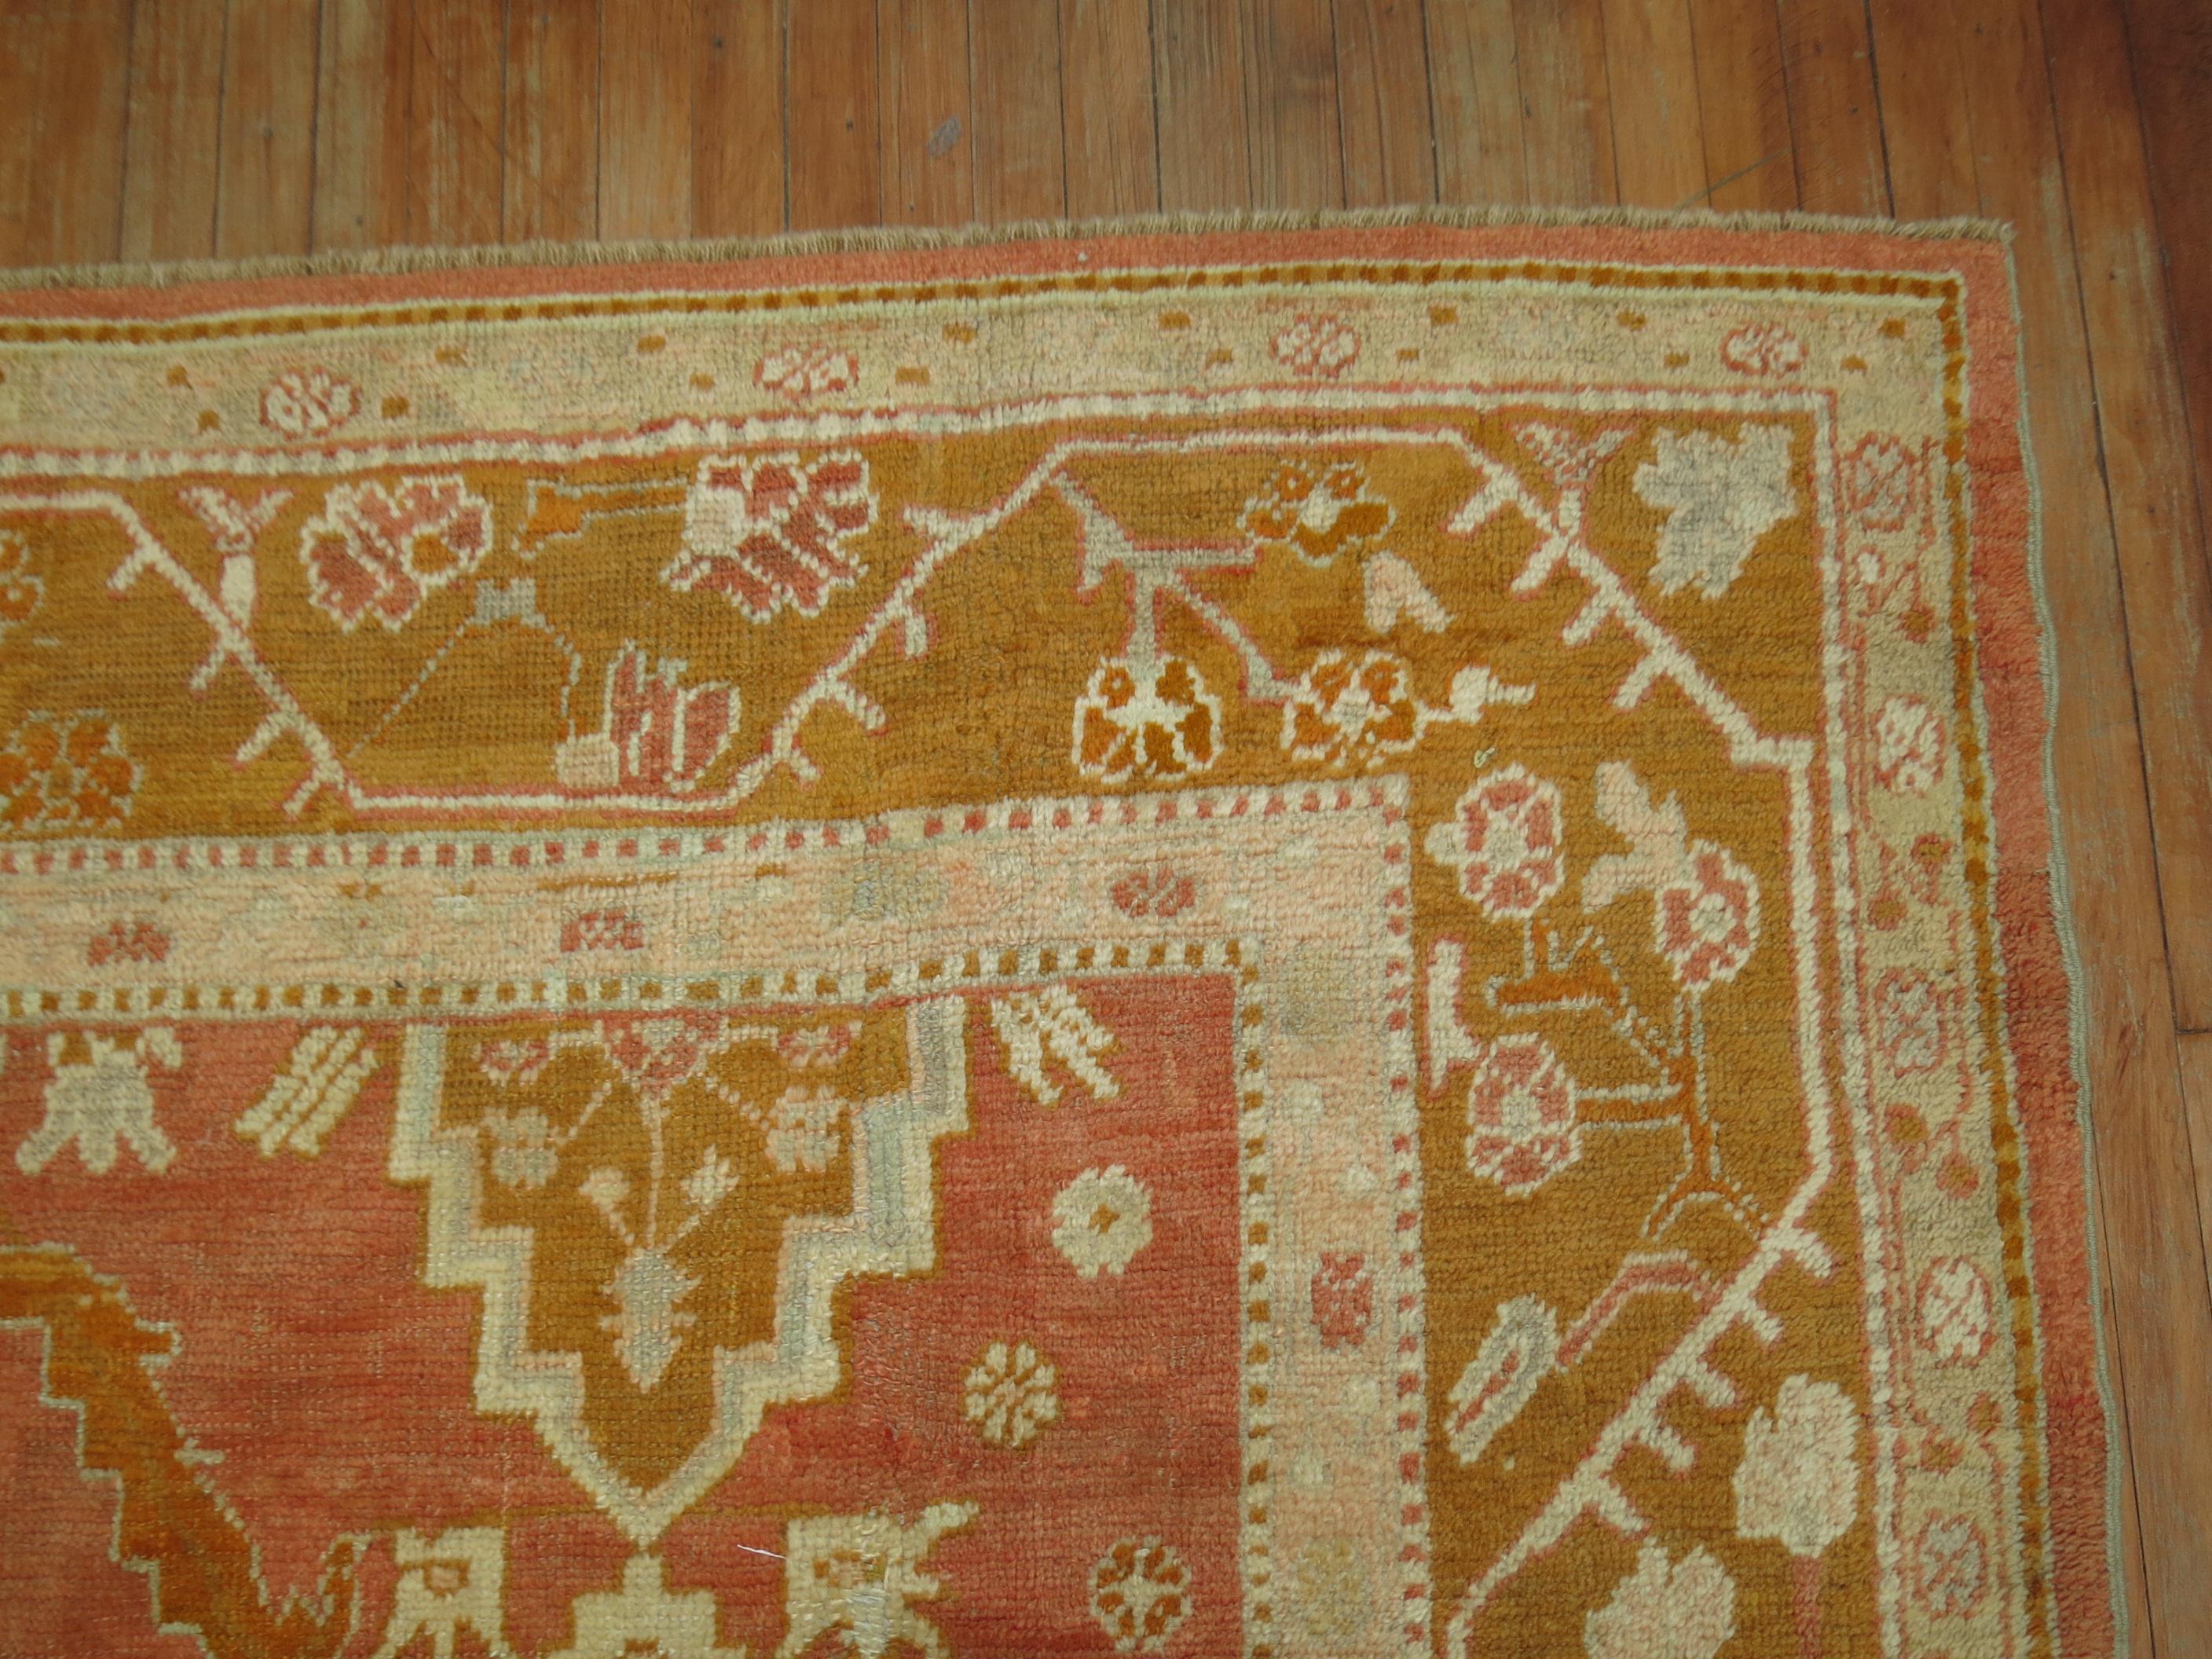 A late 19th century-early 20th century antique Turkish Oushak rug in predominant bright orange accents.